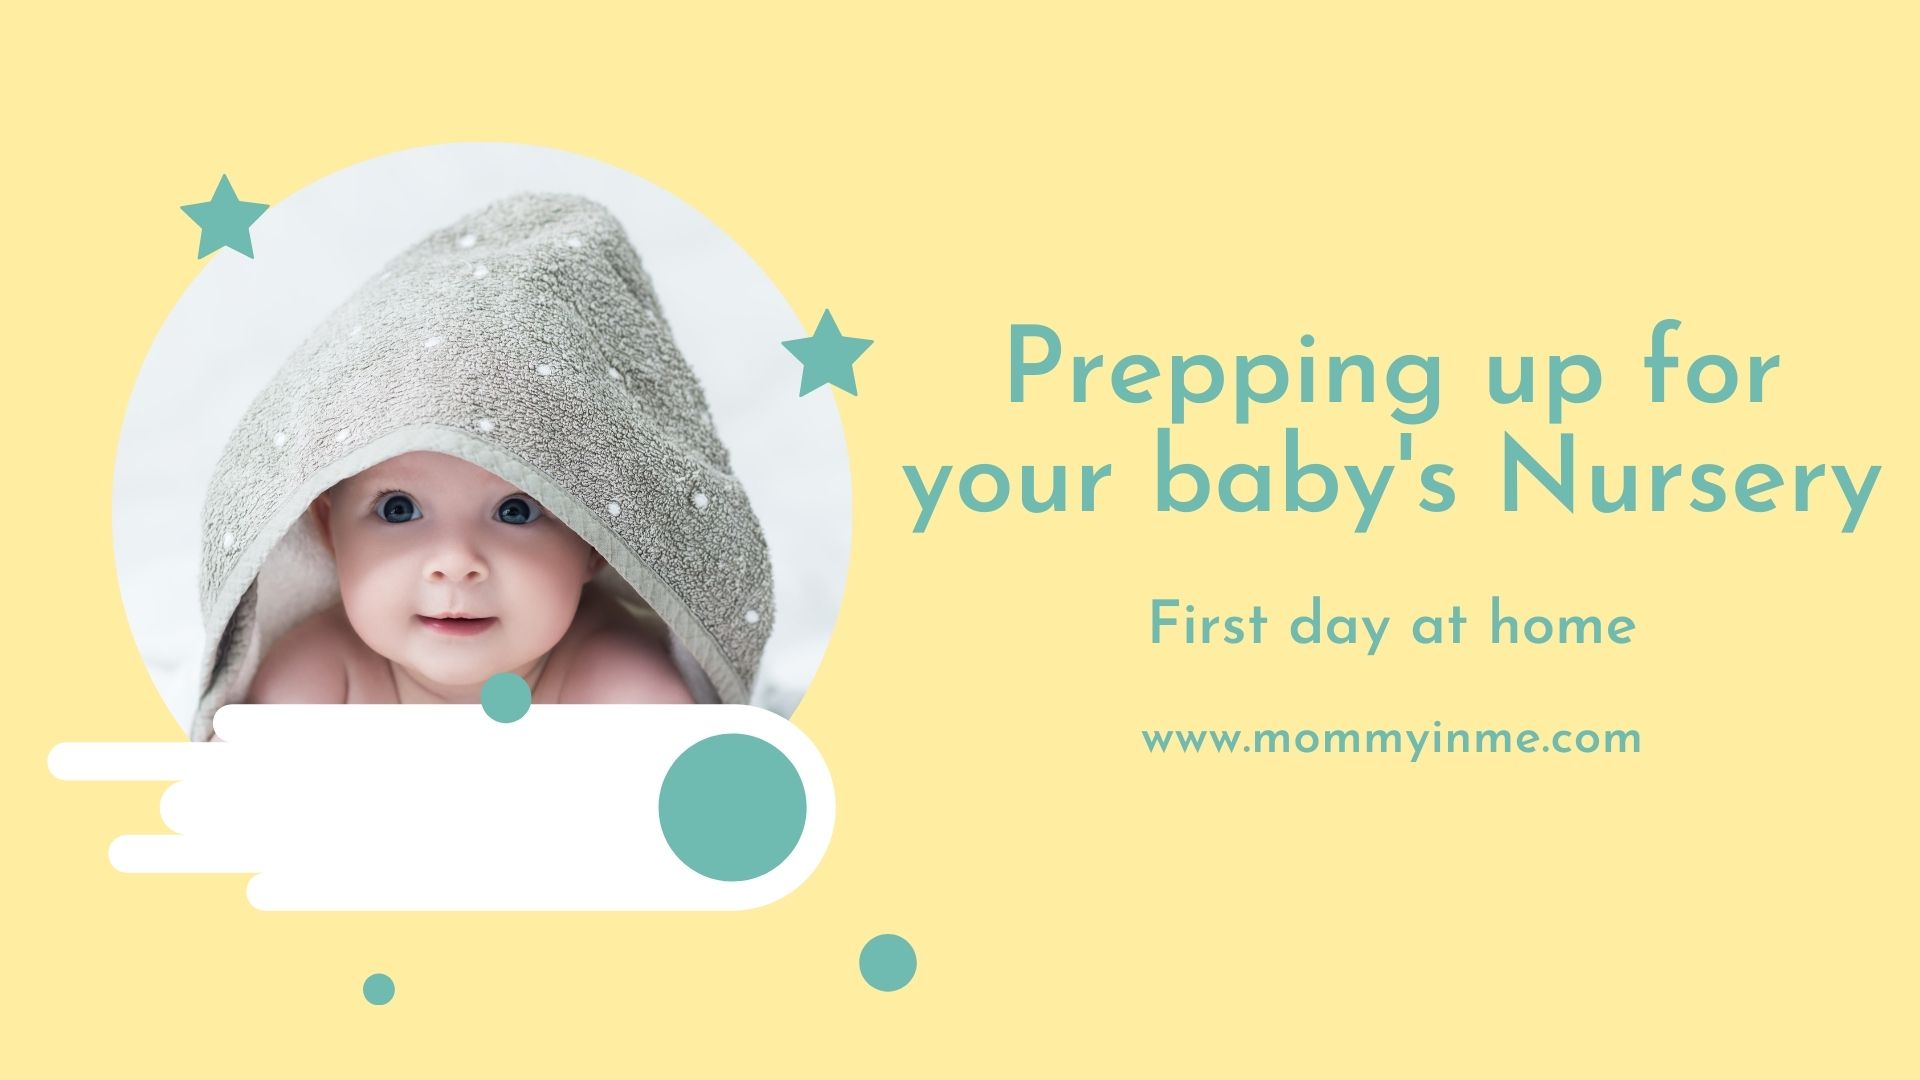 Prepping up your baby’s nursery